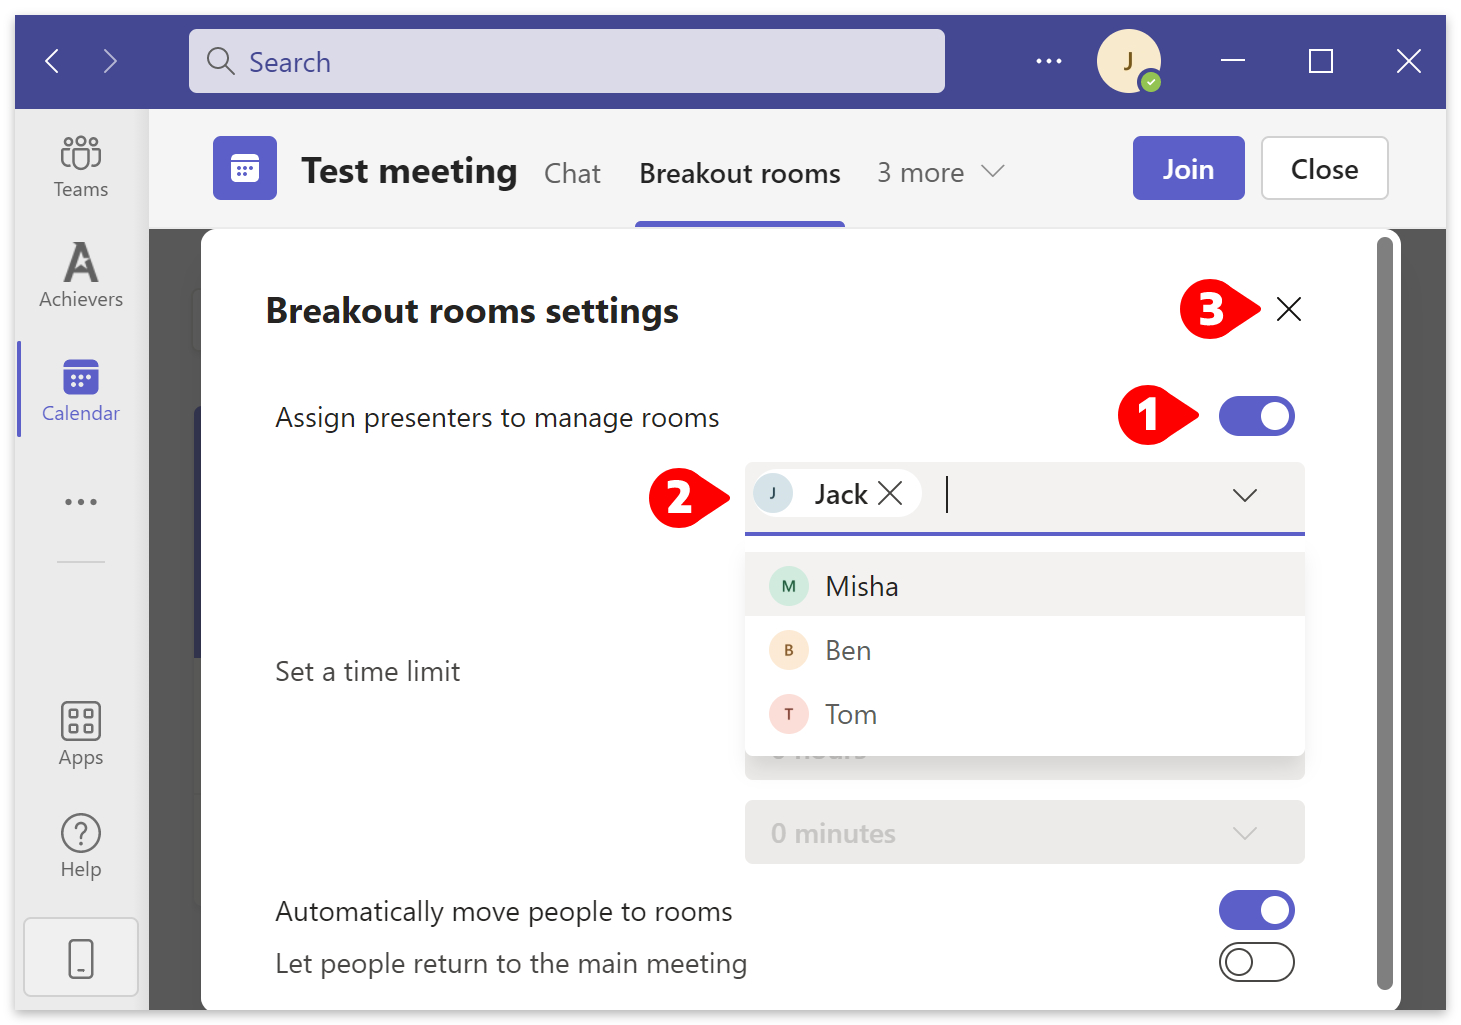 Assign presenters to manage rooms.